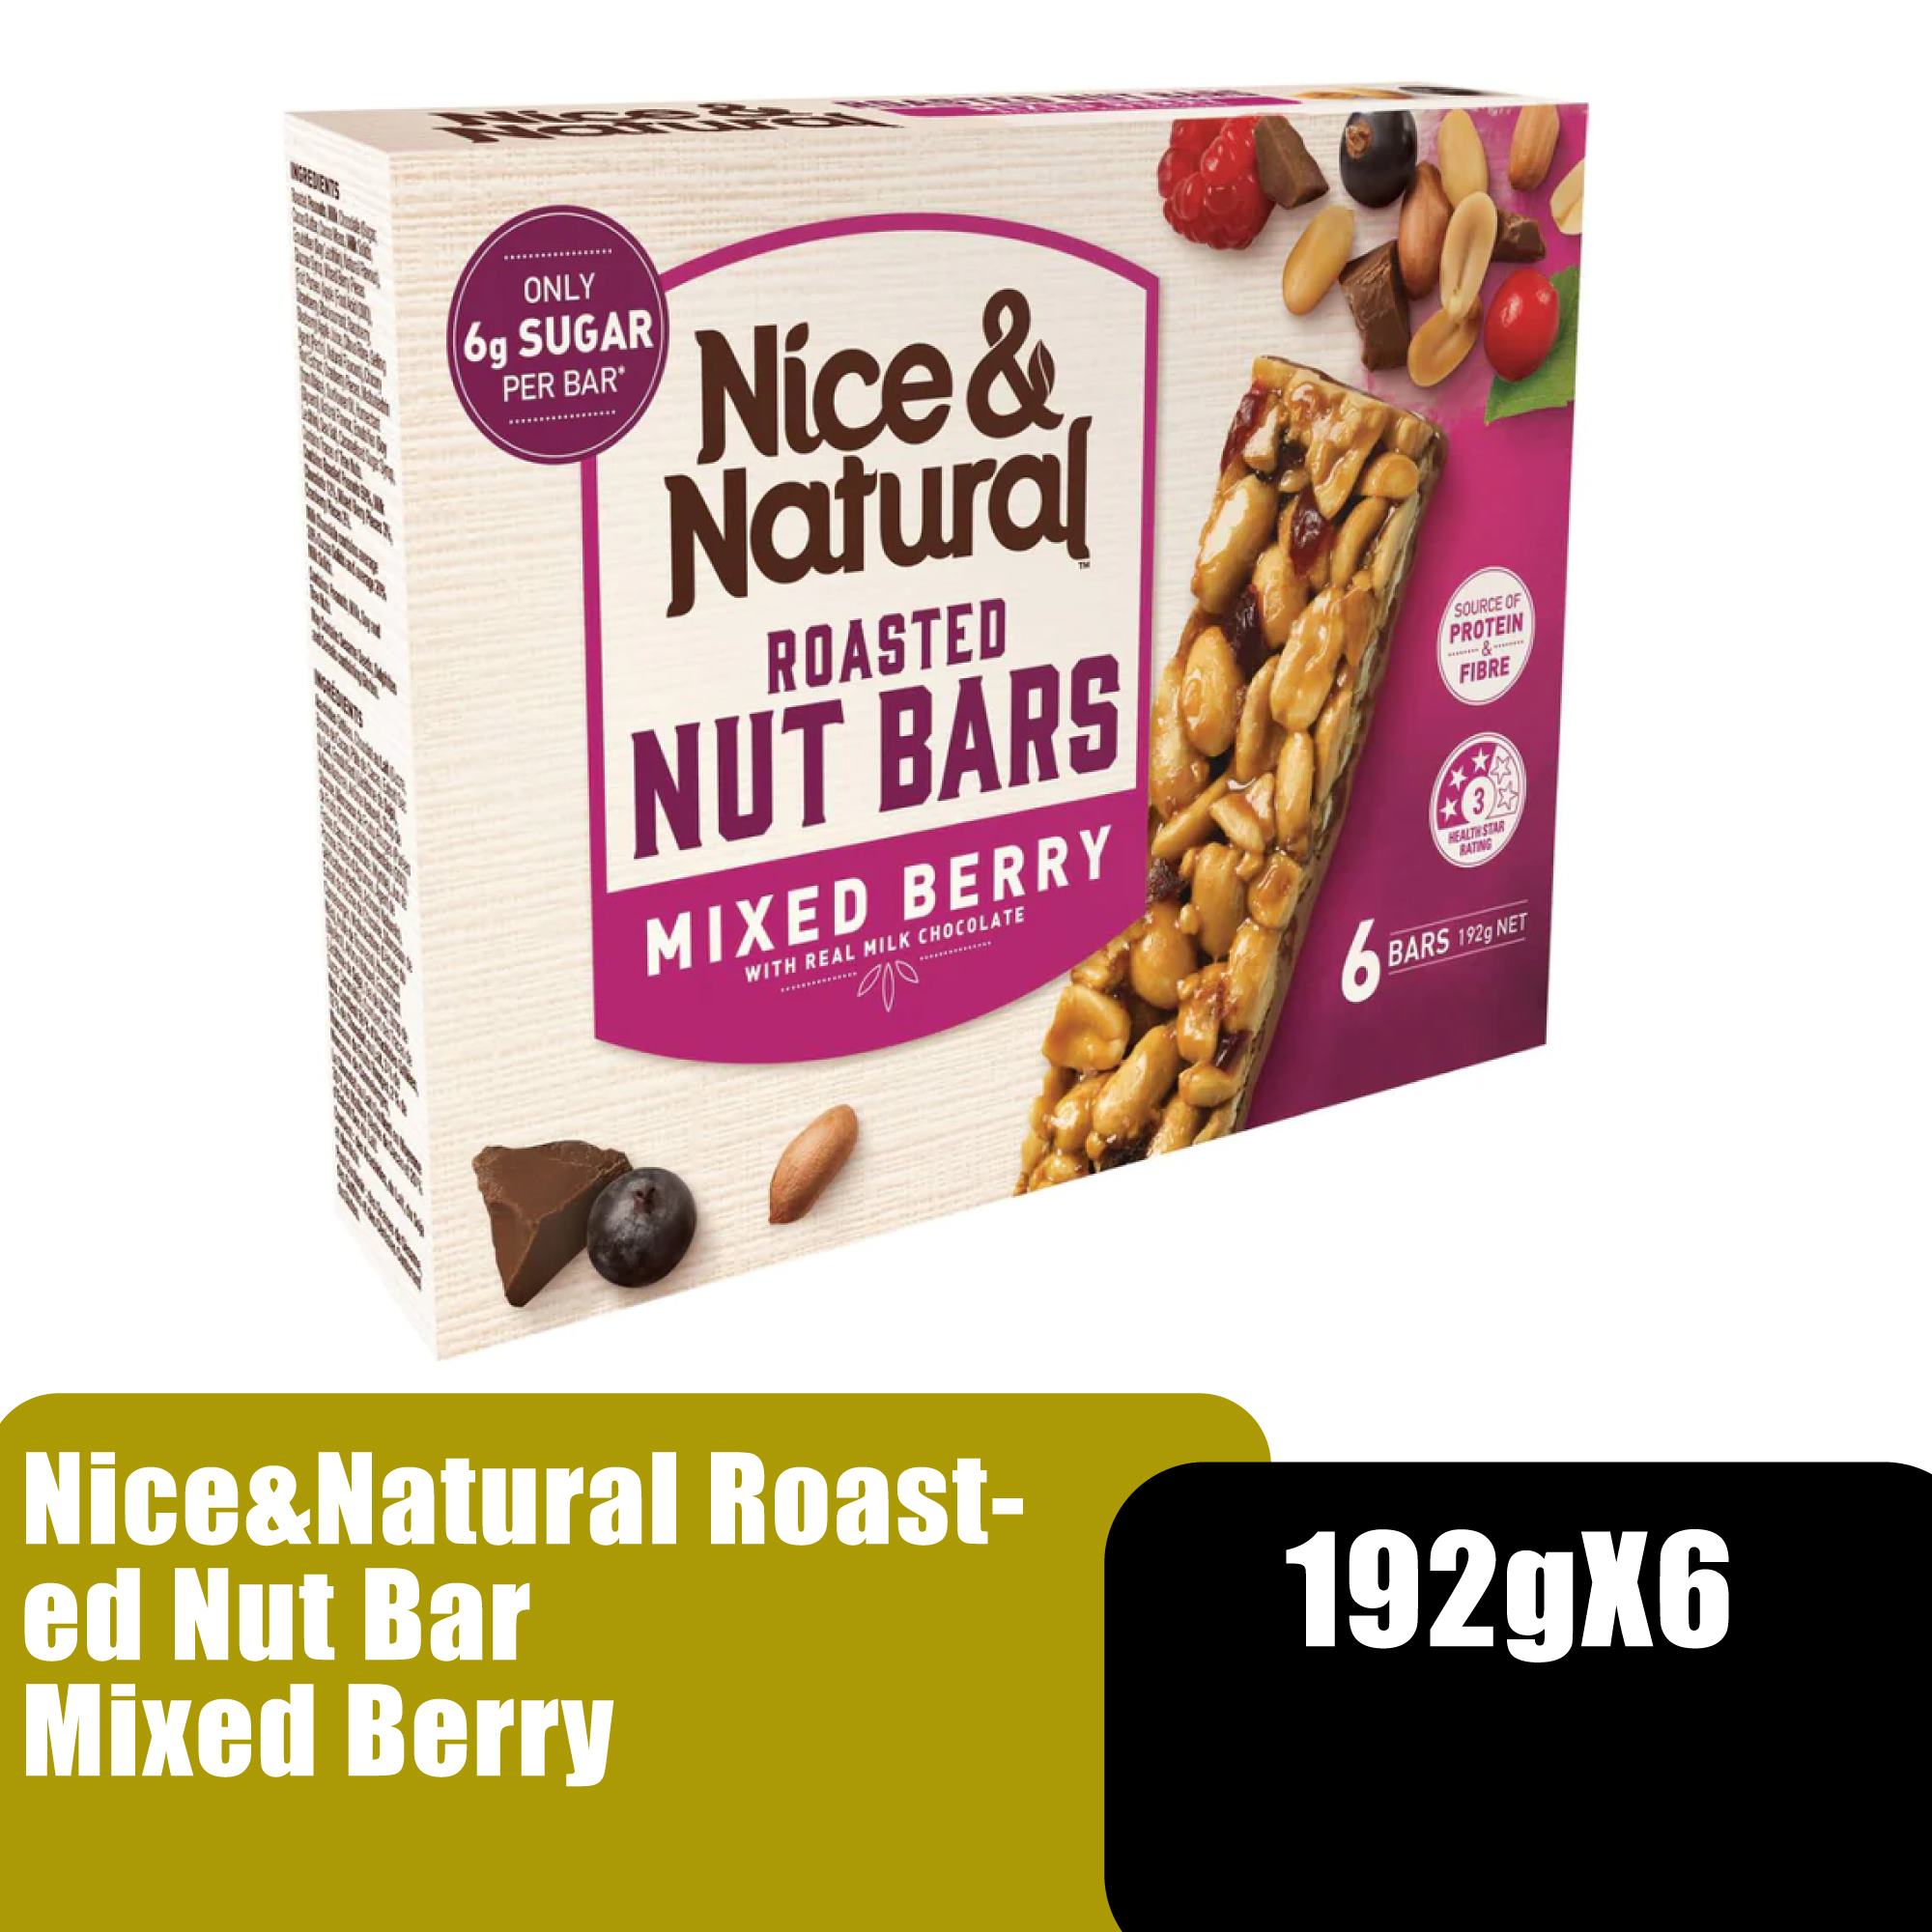 Nice&Natural Roasted Nut Bar Mix Berry 192g x 6 Protein Bar 蛋白棒 / 健康零食 (Energy Bar Snack)